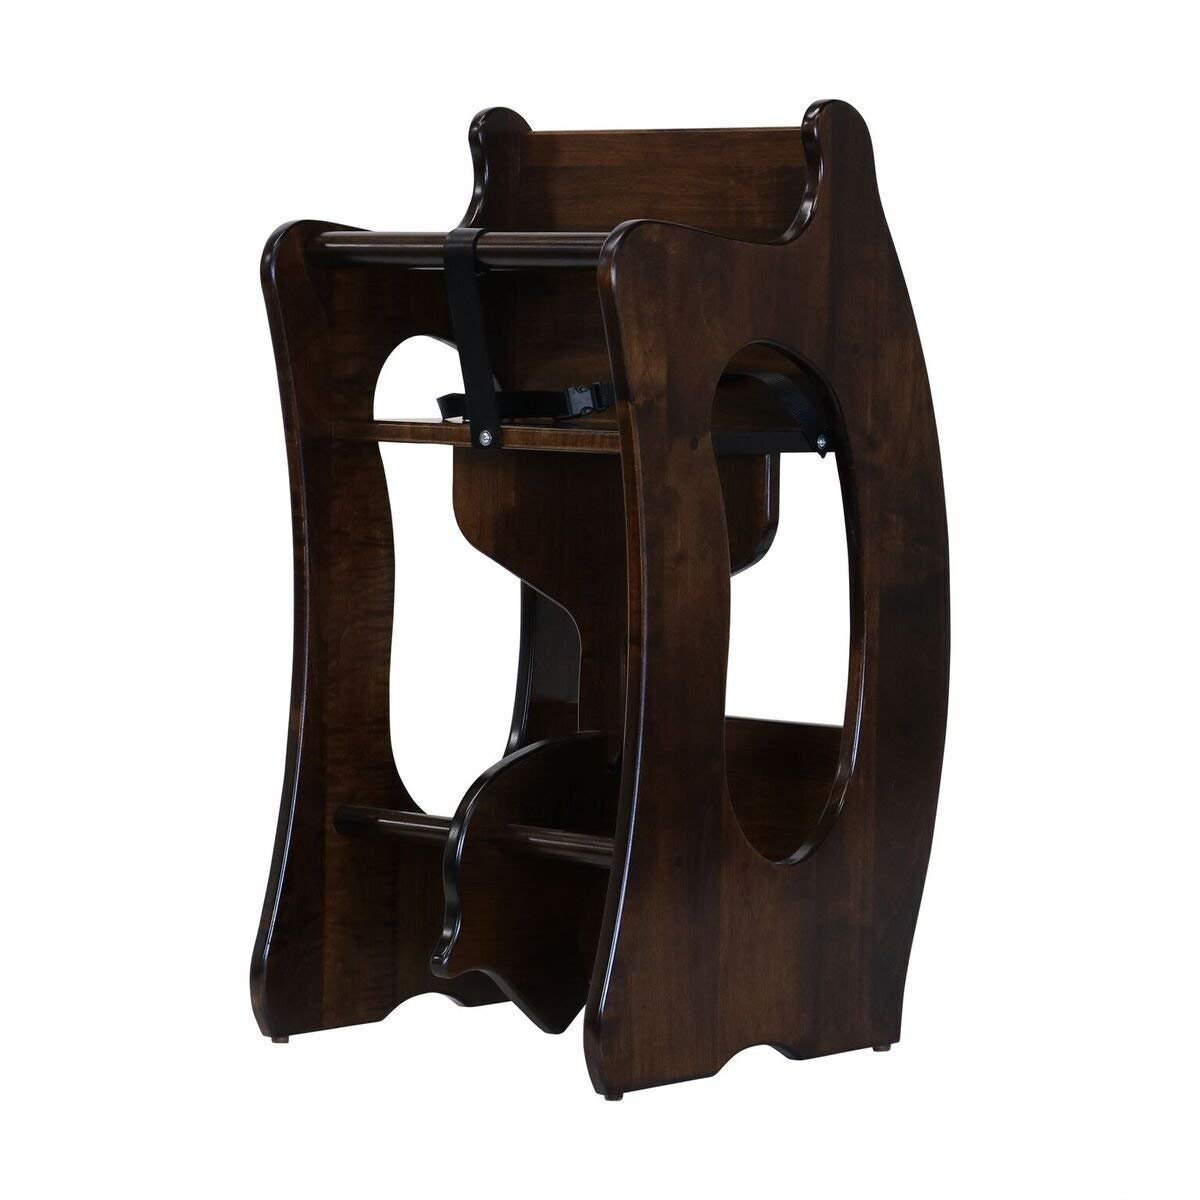 Childs 3-in-1 Amish High Chair Rocking Horse Desk Oak Cherry